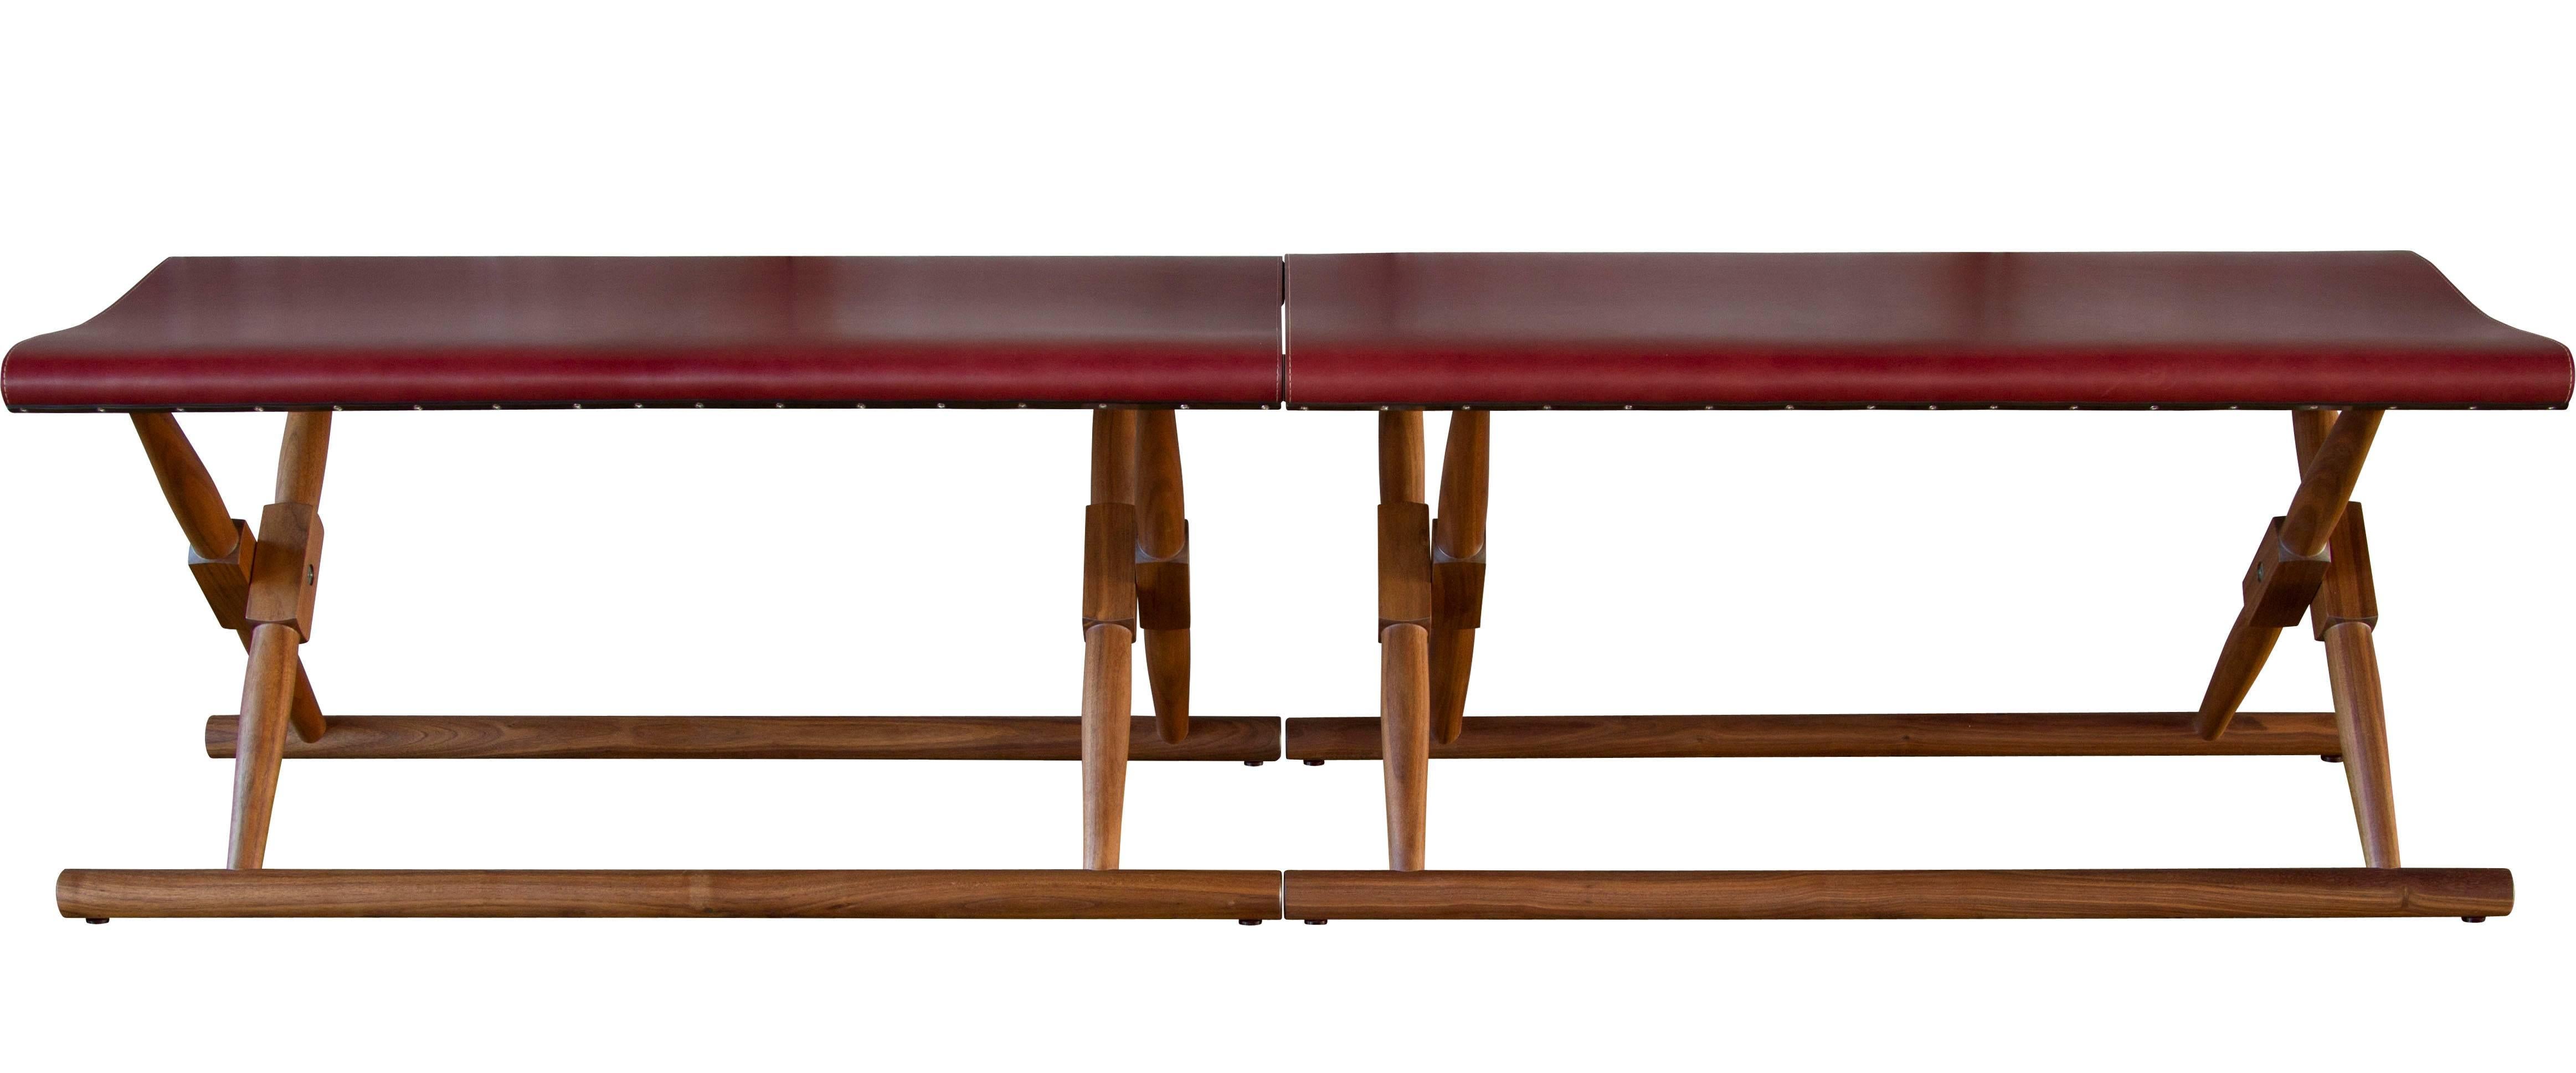 A pair of Matthiessen folding benches in oiled walnut with Moore & Giles: Diablo / Walnut leather seat slings.

The modern campaign collection by Richard Wrightman combines the vernacular of traditional form with a modern aesthetic, mixing memory